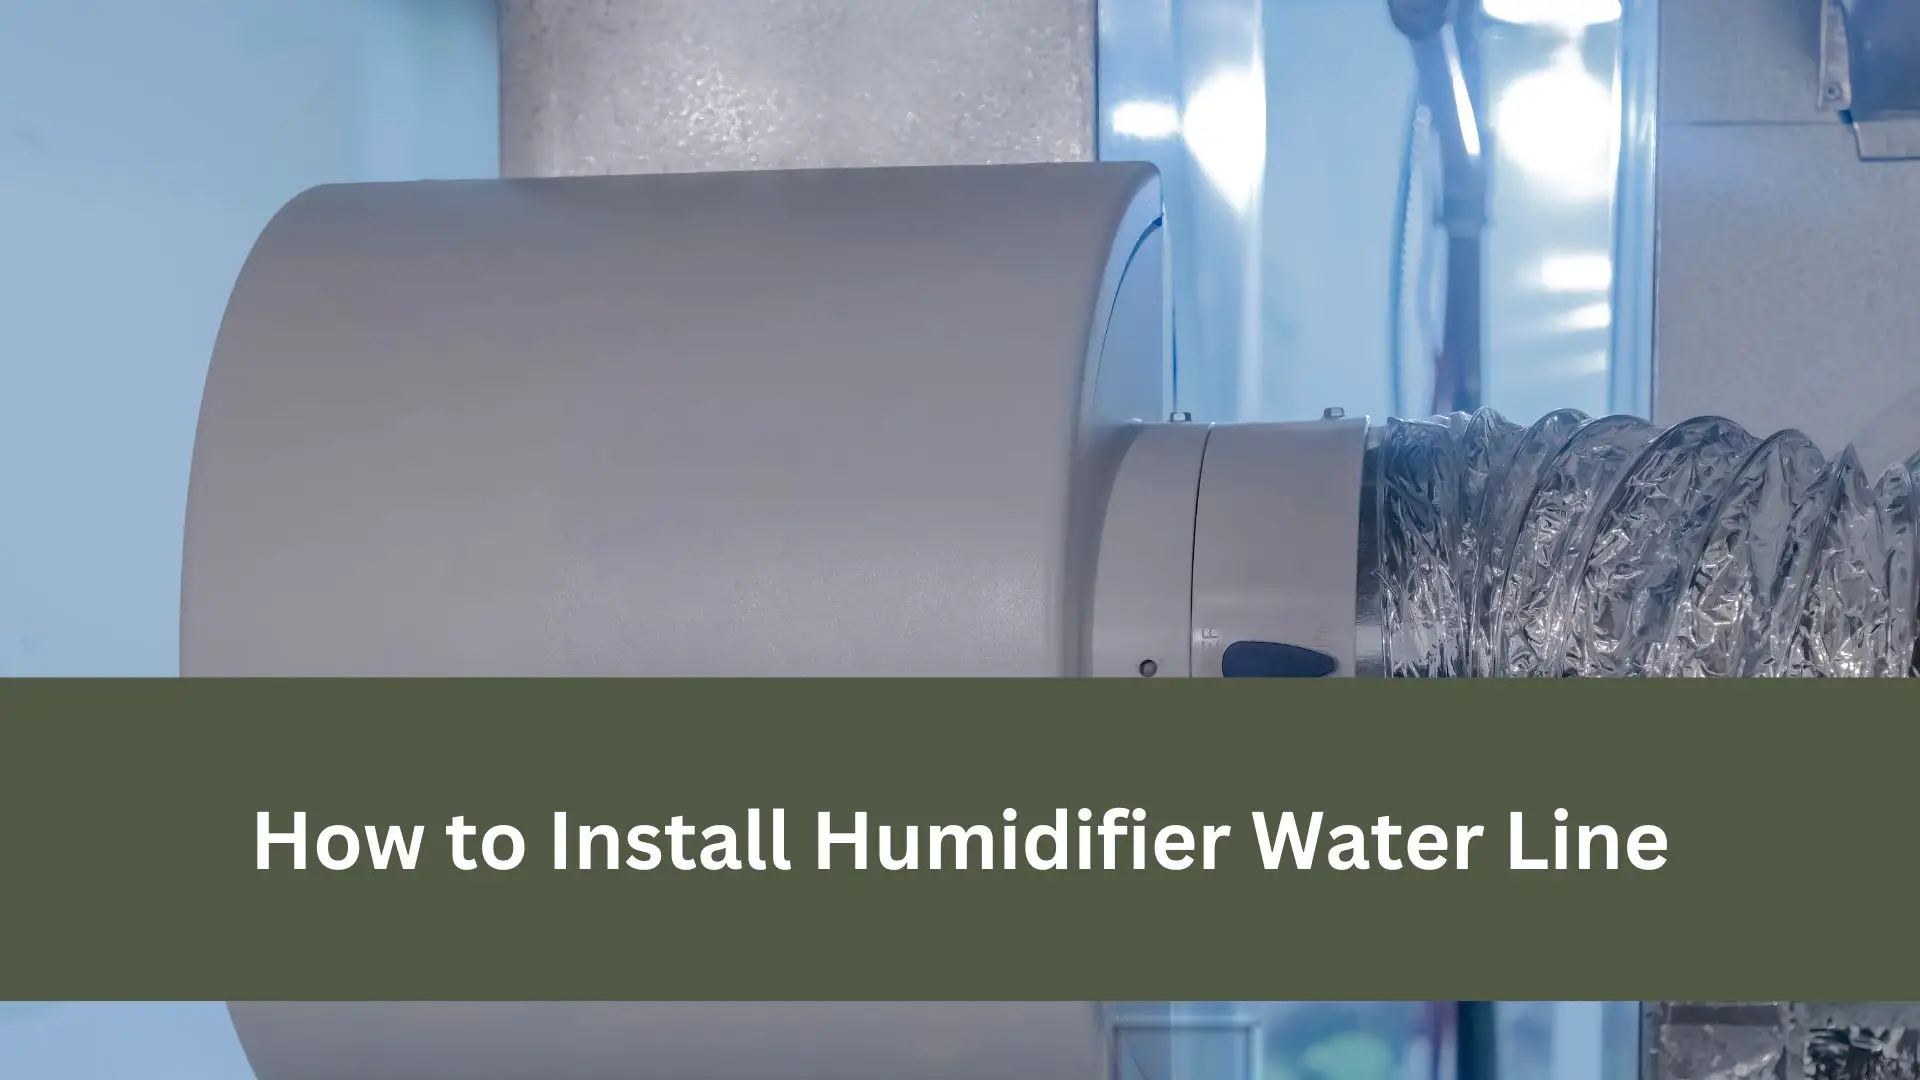 How to Install Humidifier Water Line